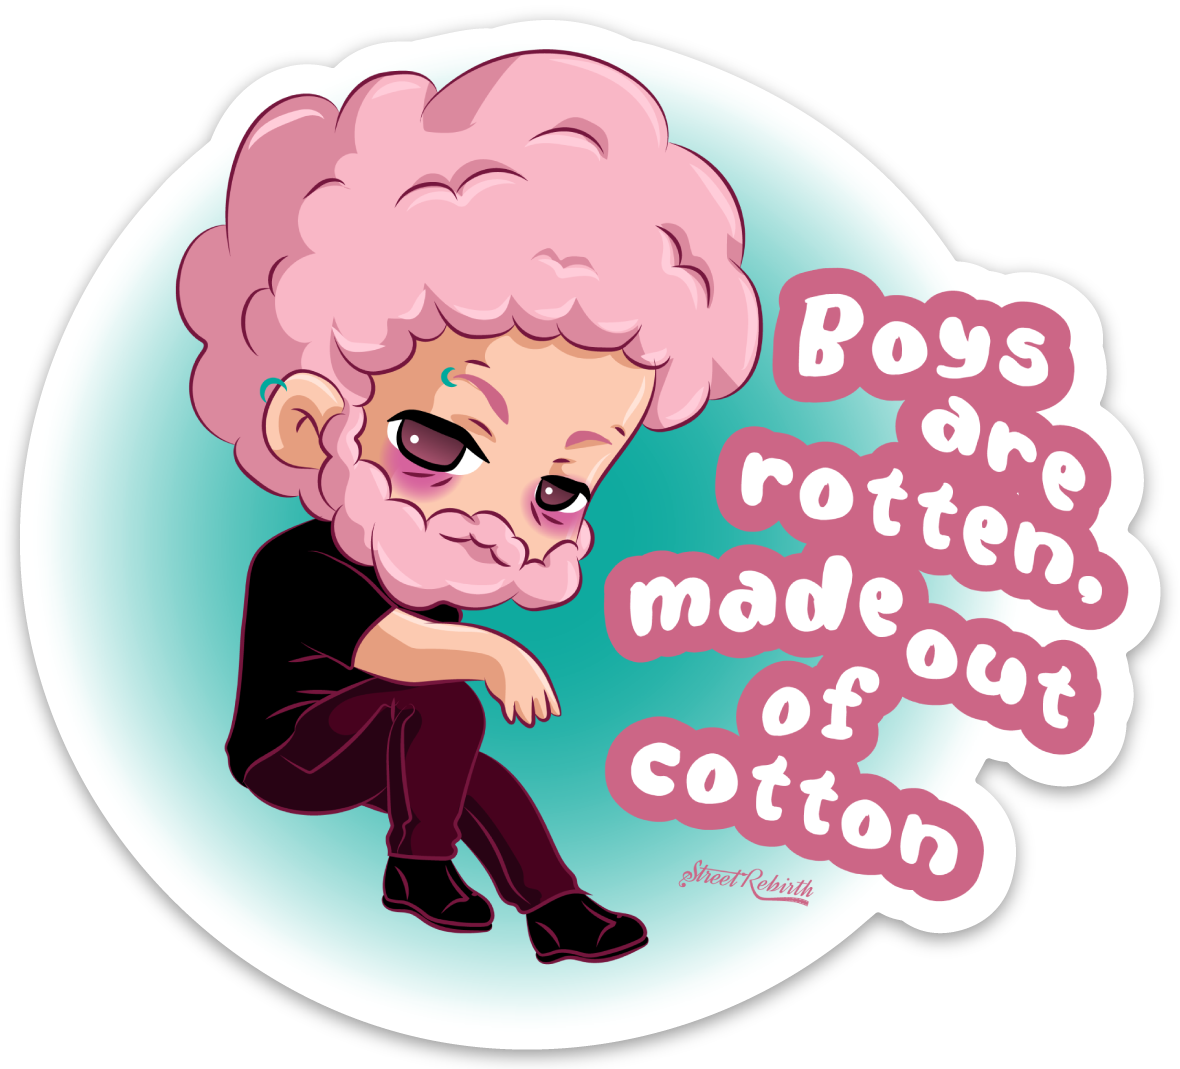 BOYS ARE ROTTEN, MADE OUT OF COTTON PUN STICKER – ONE 4 INCH WATER PROOF VINYL STICKER – FOR HYDRO FLASK, SKATEBOARD, LAPTOP, PLANNER, CAR, COLLECTING, GIFTING